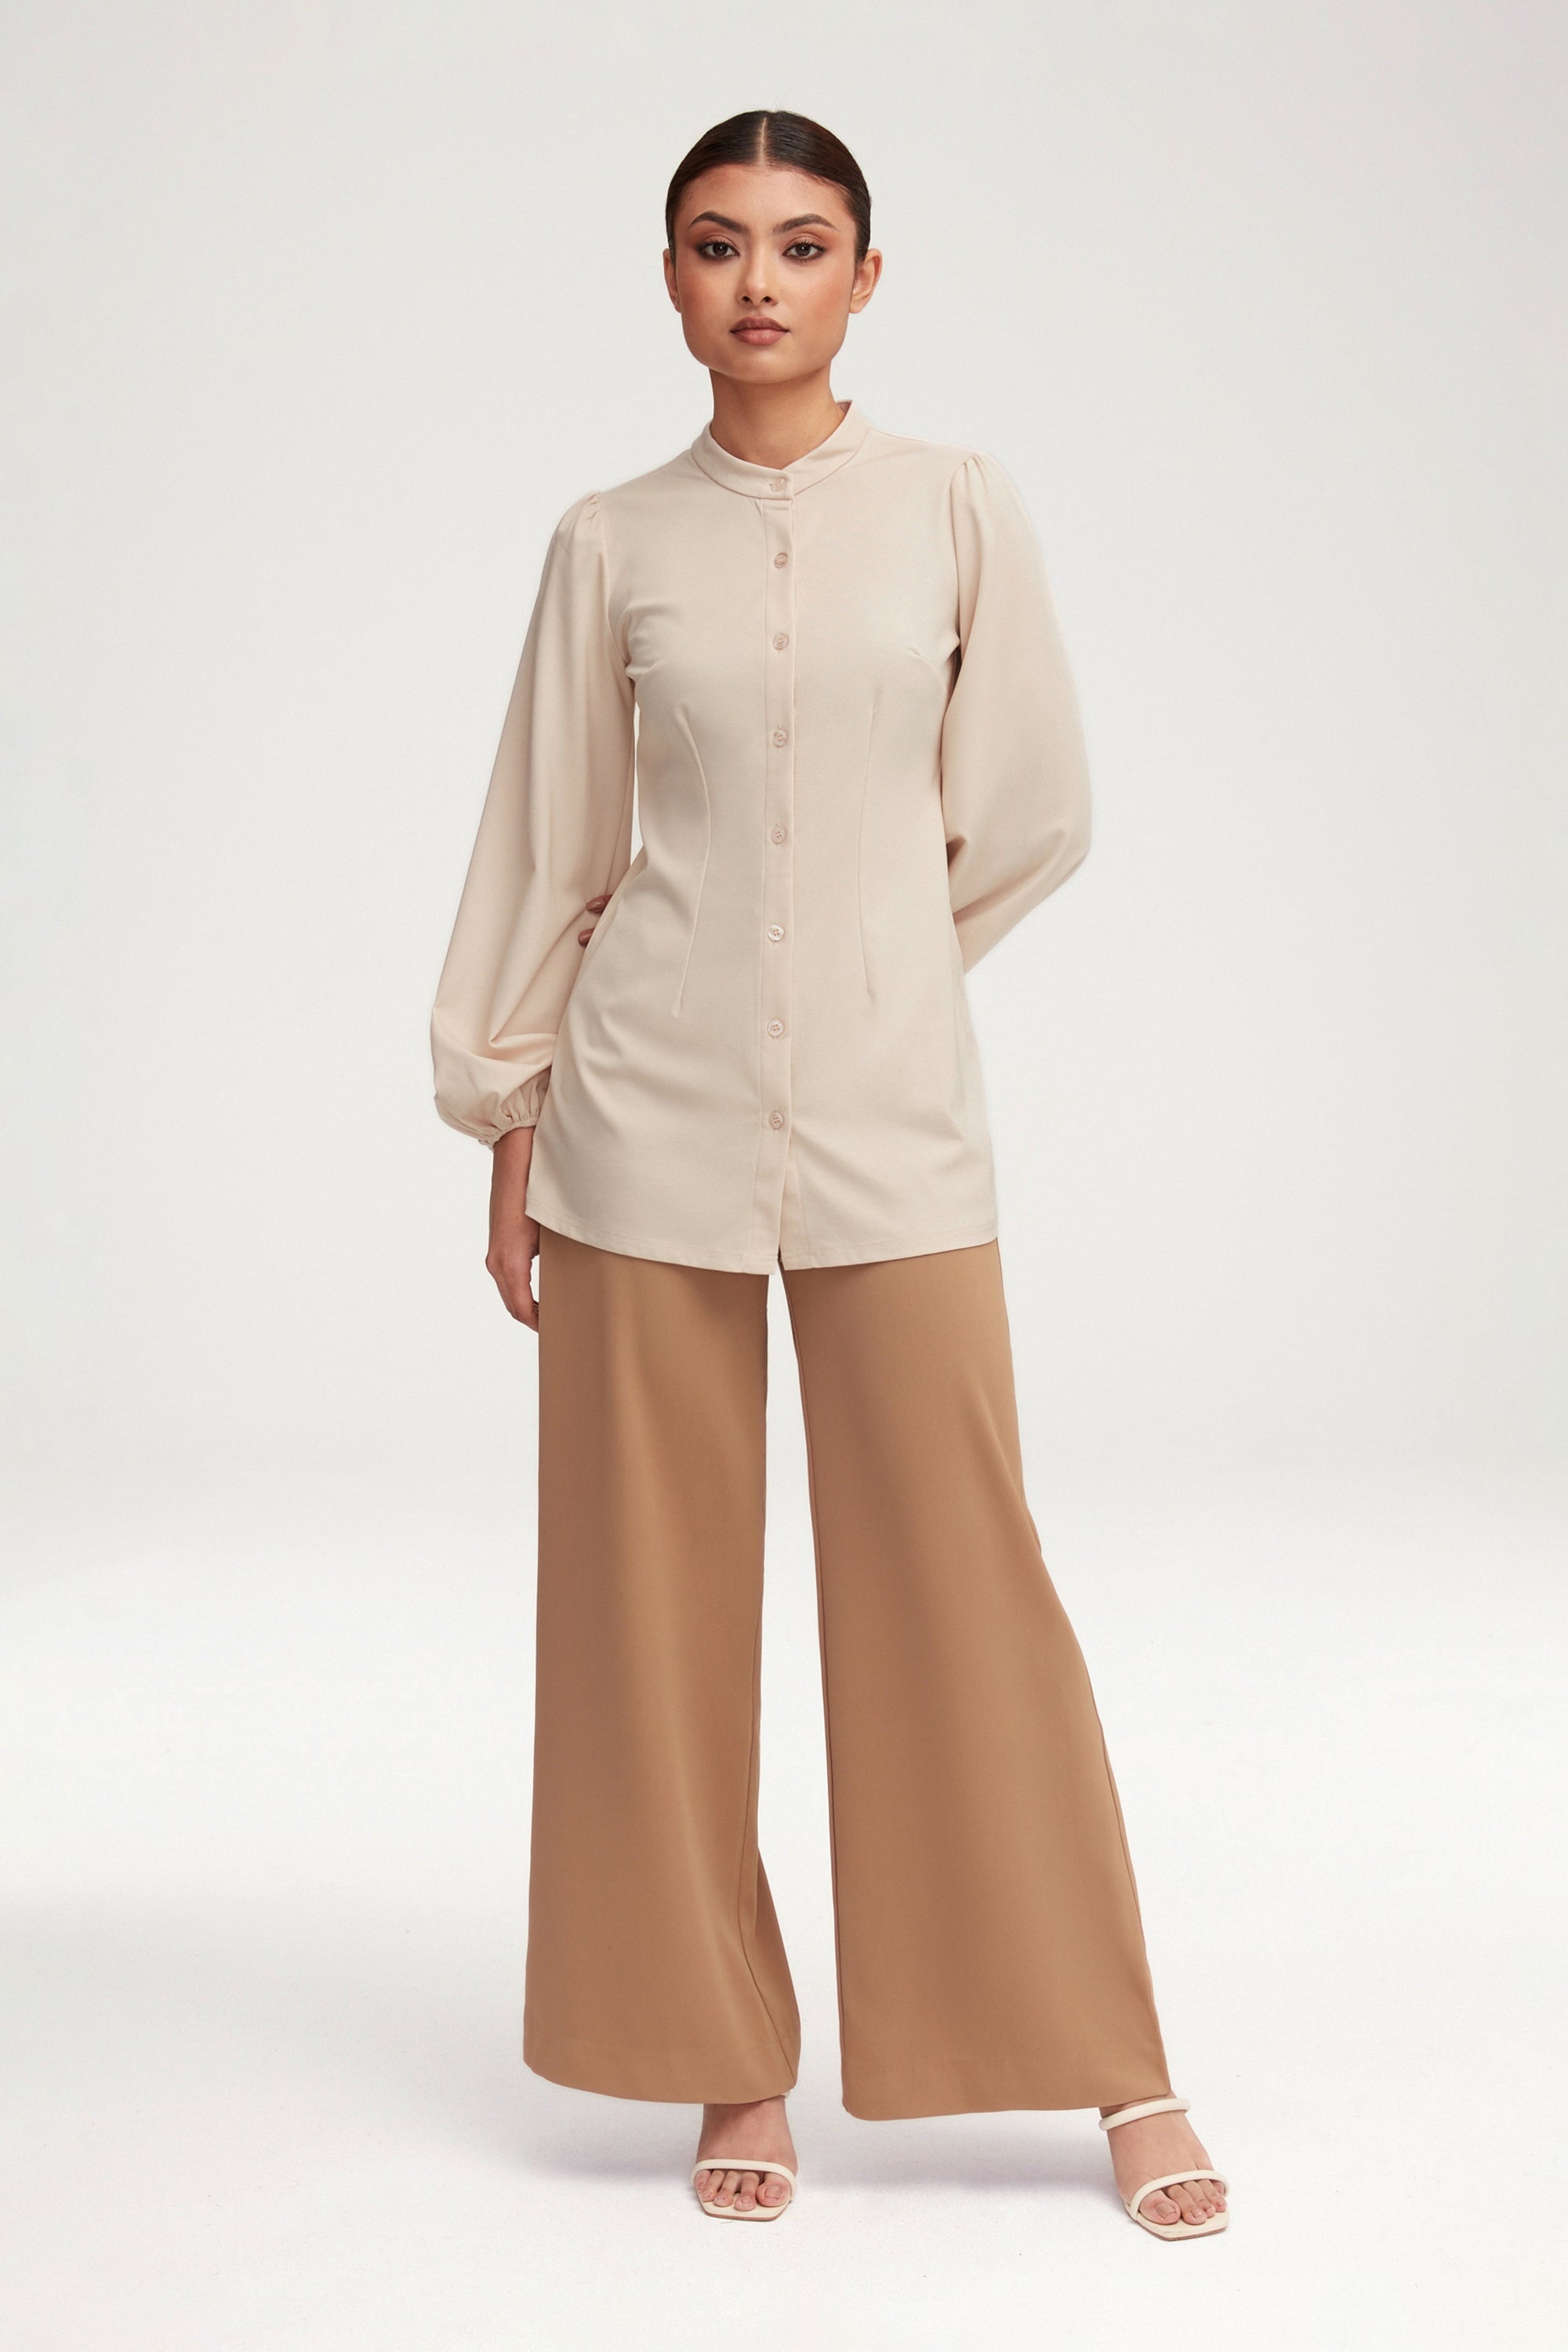 Essential Ultra Wide Leg Pants - Caffe Clothing Veiled 